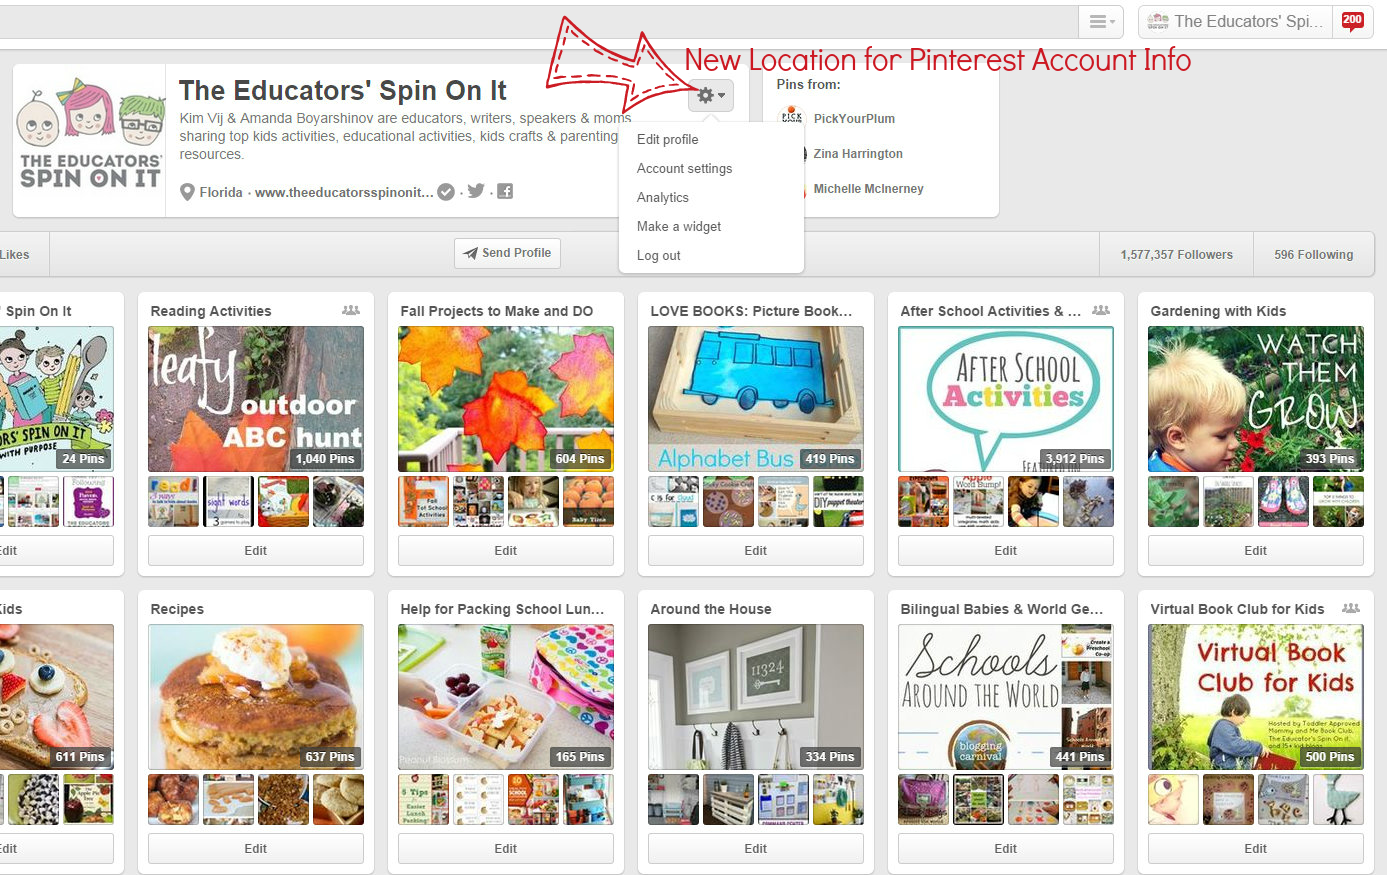 How to Manage your account setting on Pinterest 